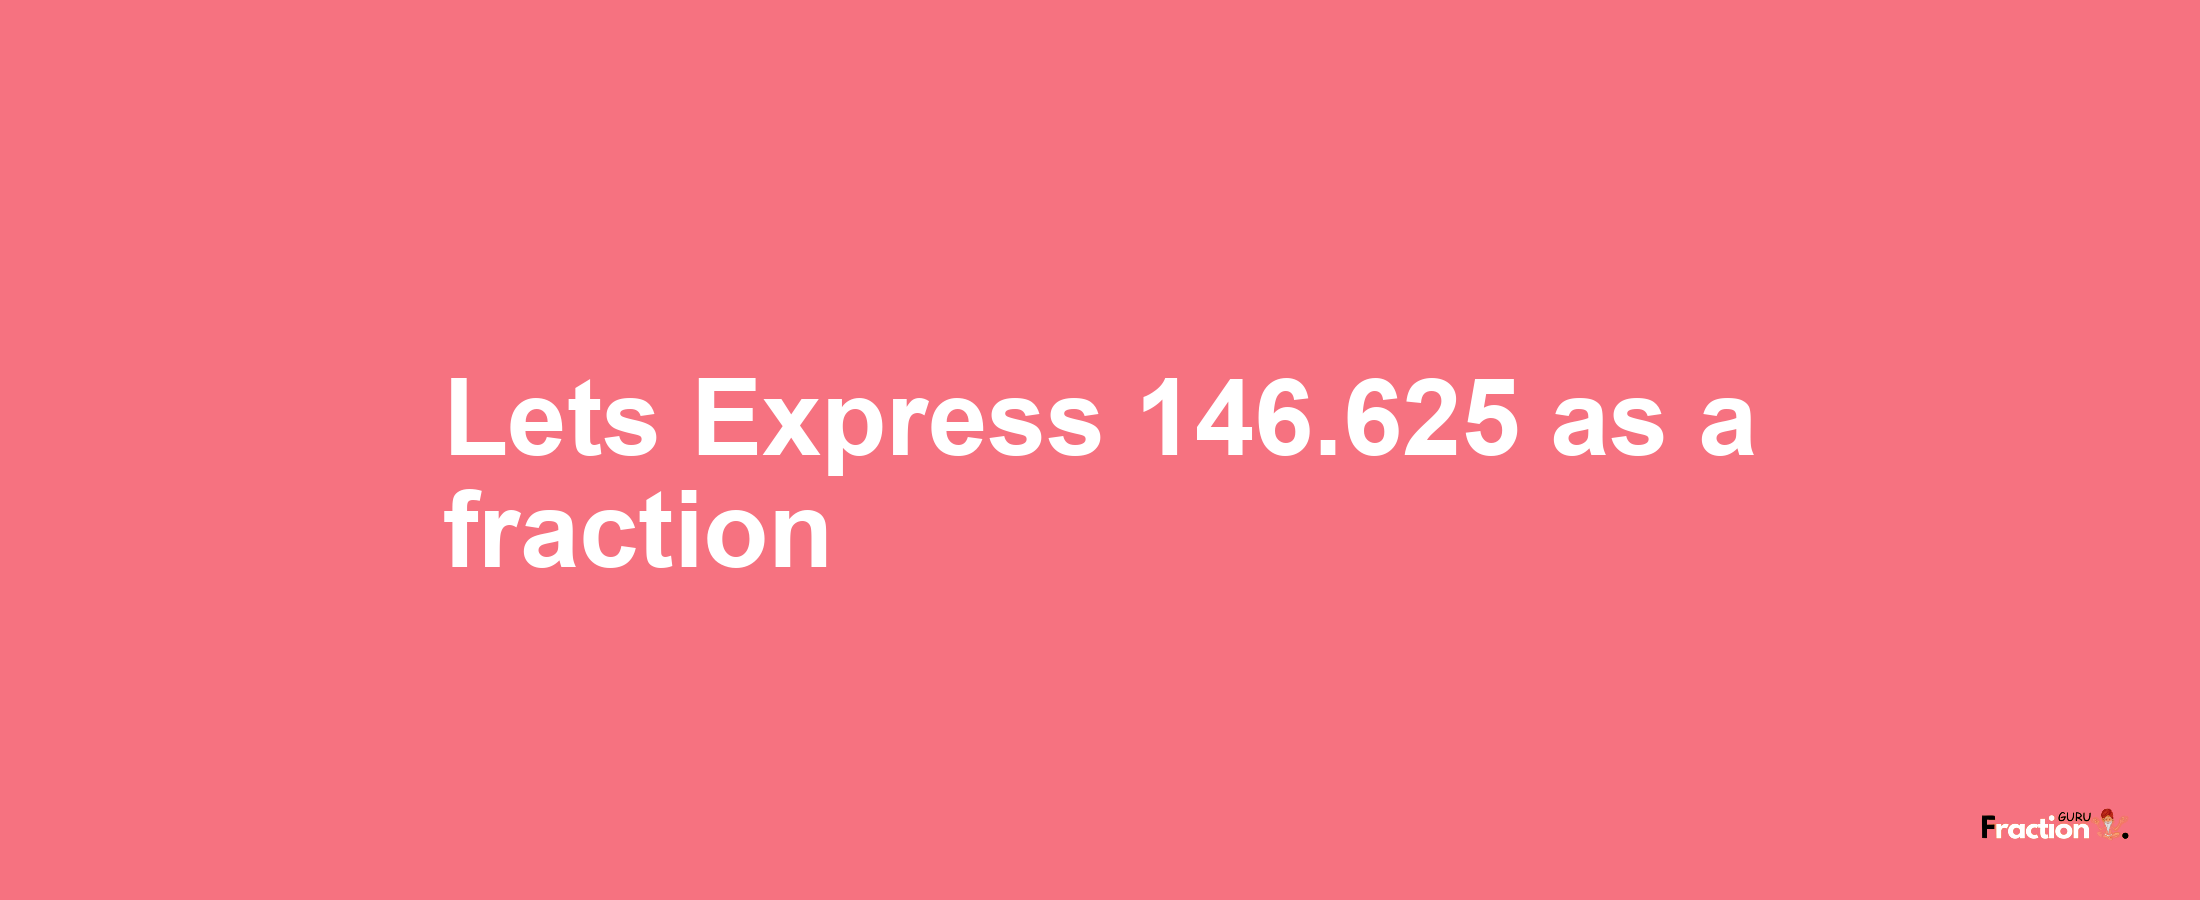 Lets Express 146.625 as afraction